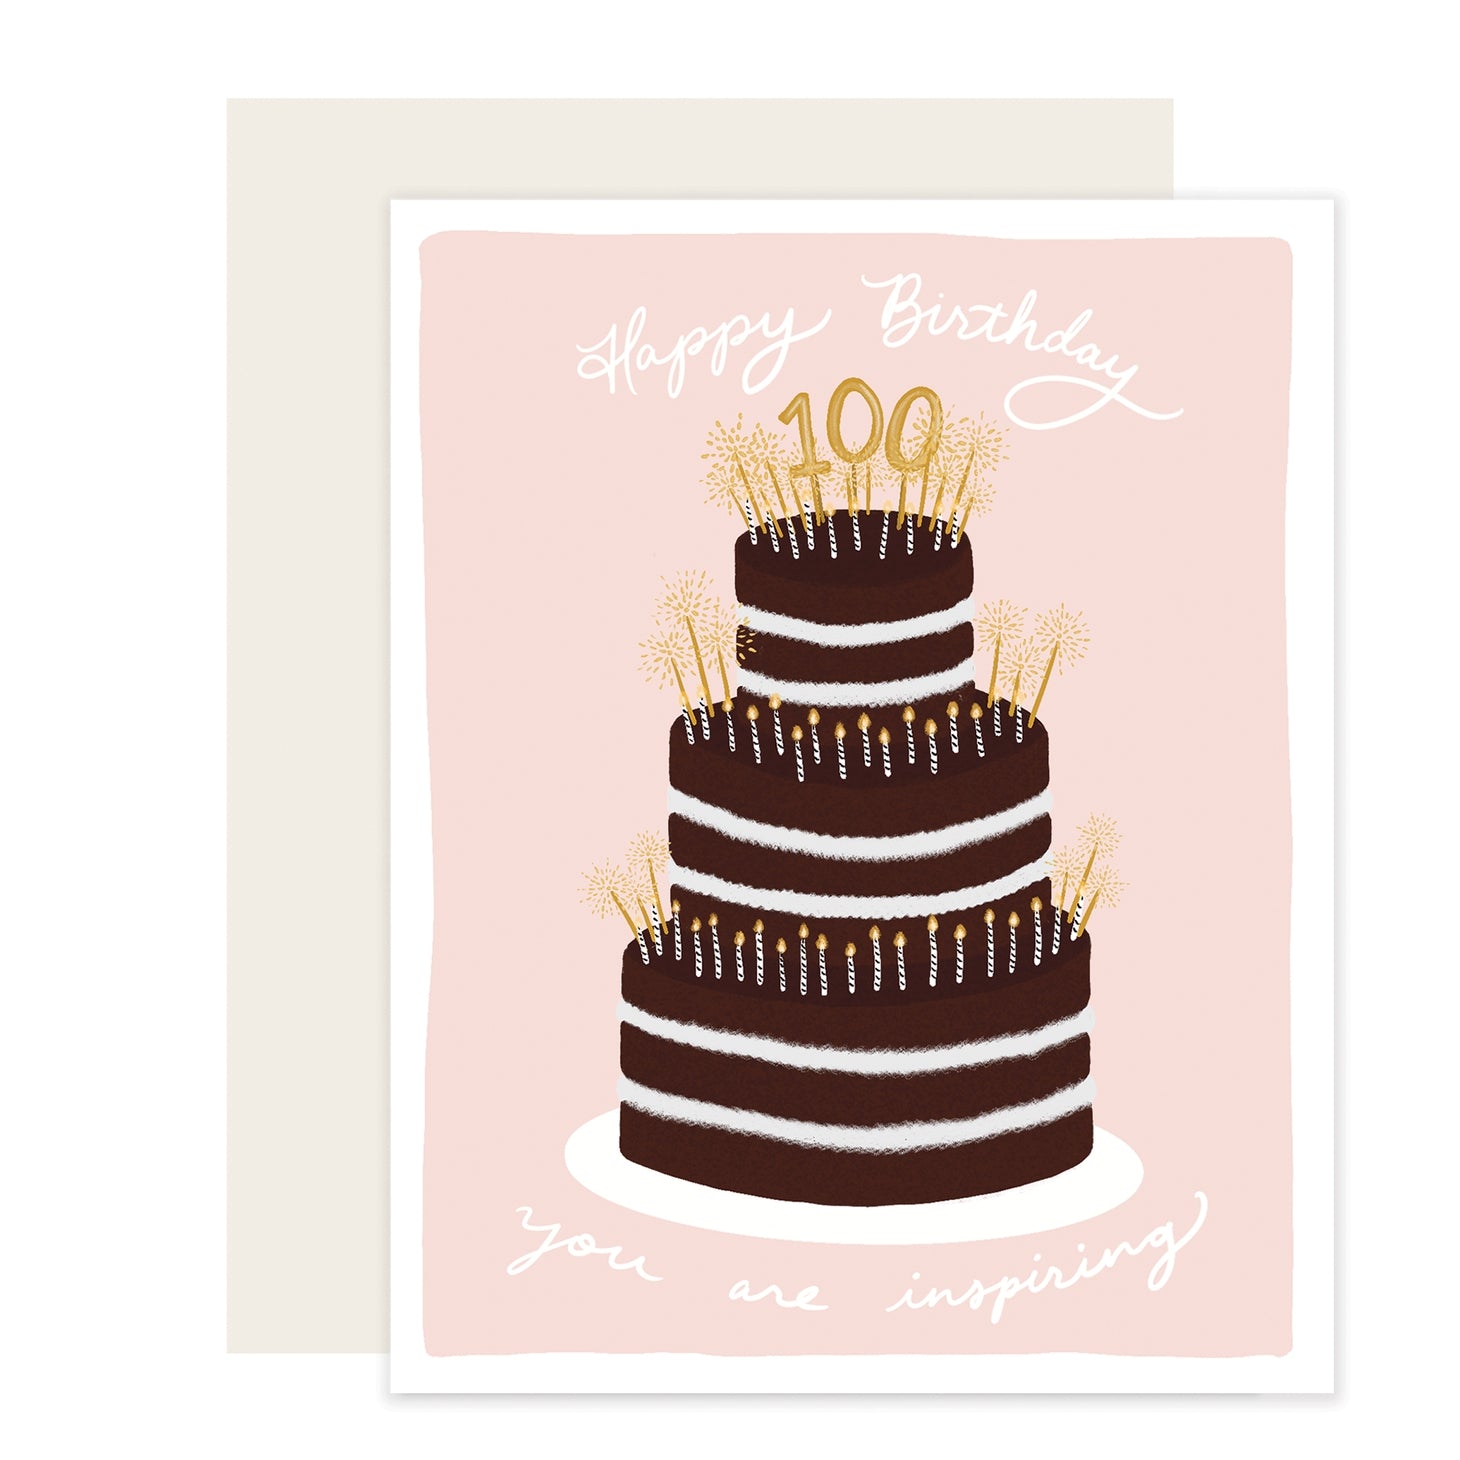 Pink card with white text saying, “Happy Birthday You Are Inspiring”. Images of a three tier chocolate birthday cake with white and gold candles and a 100 gold cake topper. An ivory envelope is included.